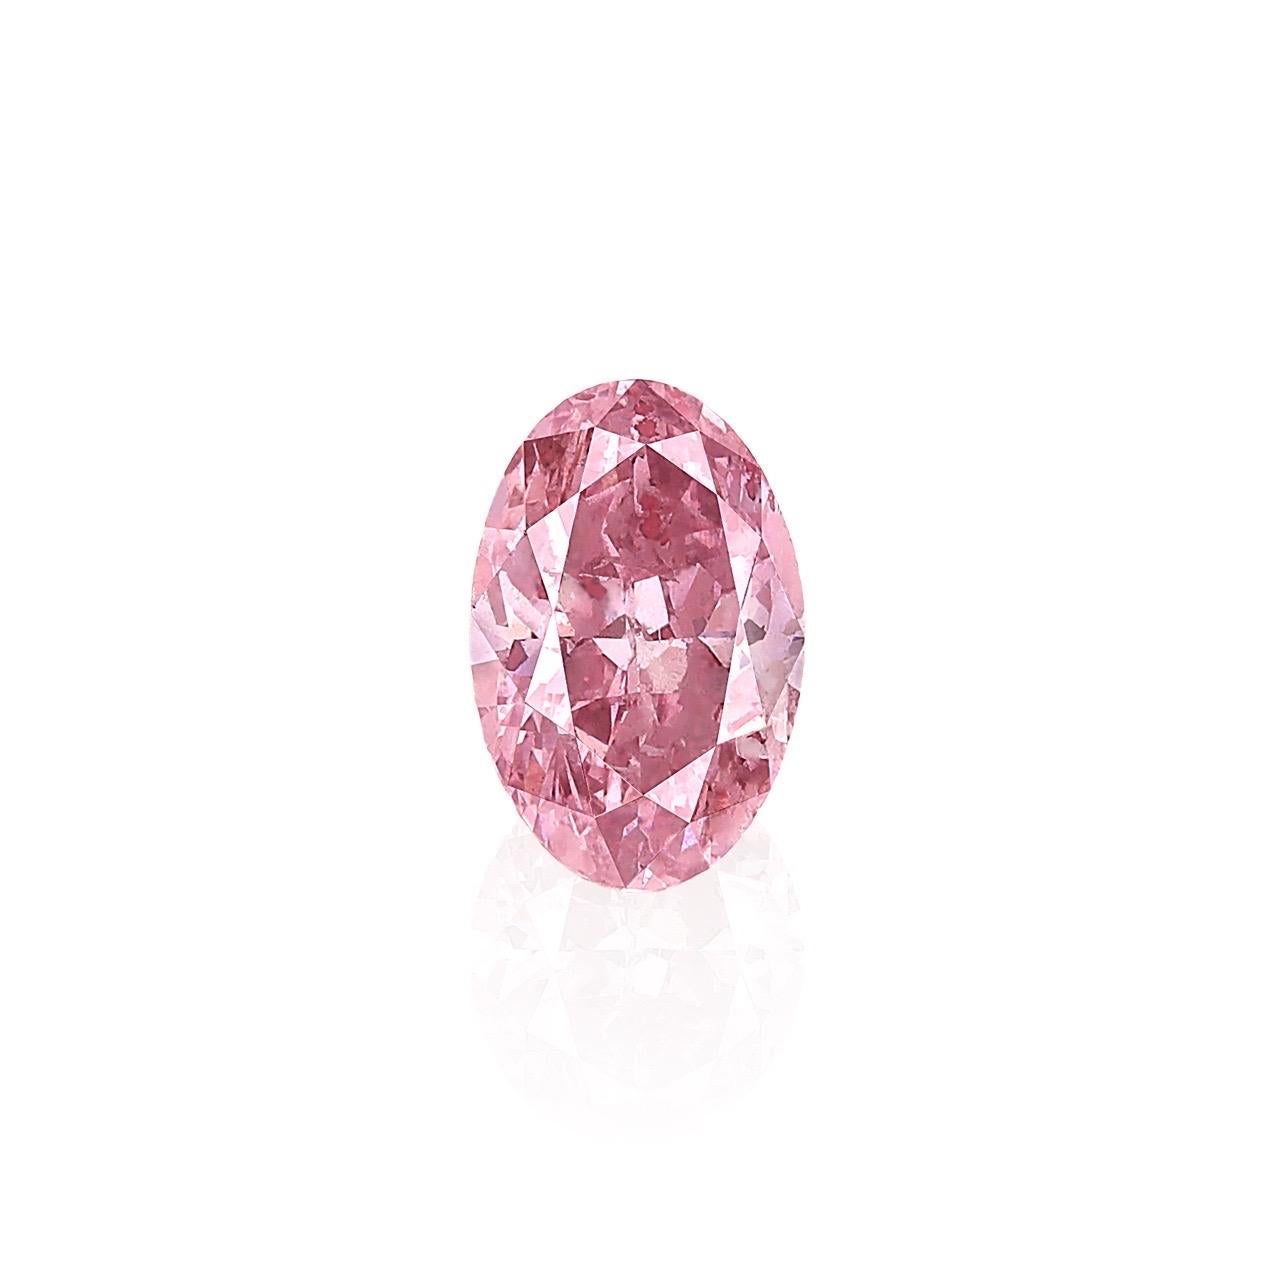 0.51-6P / Fancy Intense Purplish Pink, P2. Oval

From Emilio Jewelry, a well known and respected wholesaler/dealer located on New York’s iconic Fifth Avenue, 

Please inquire for more images, certificates, details, and any questions. Please contact